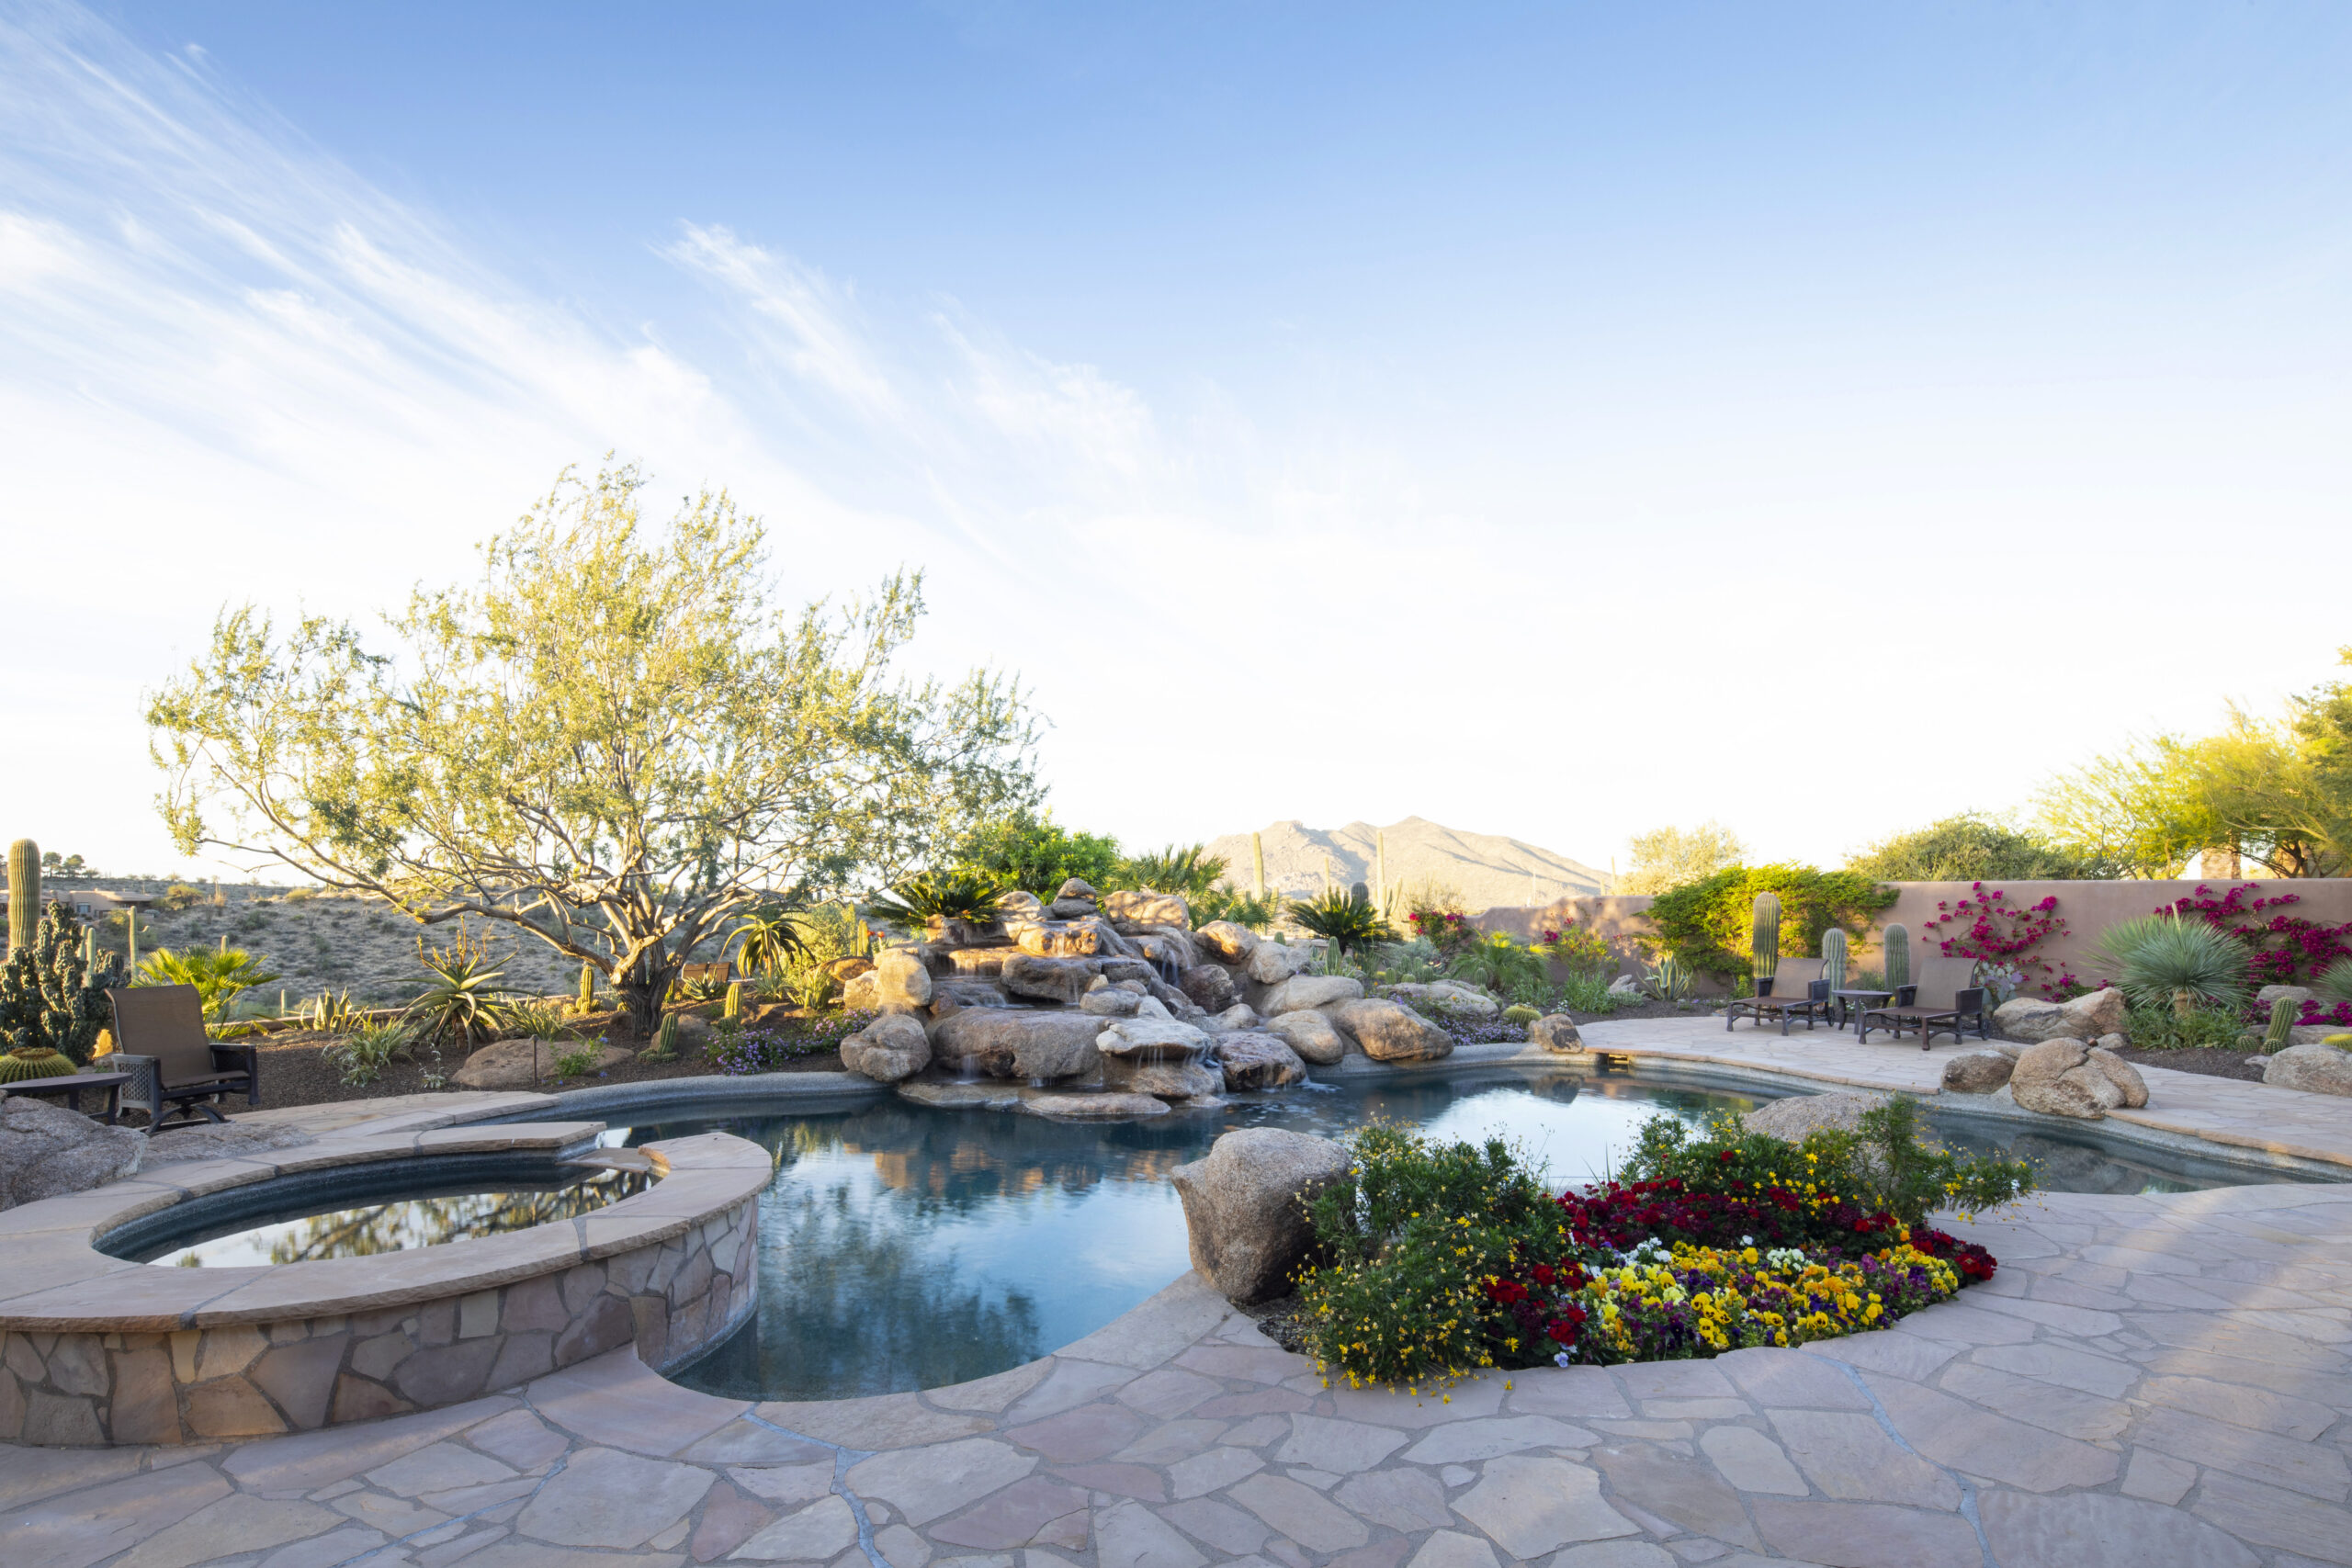 Pool Design & Landscaping: Why You Should Hire One Contractor To Do Both